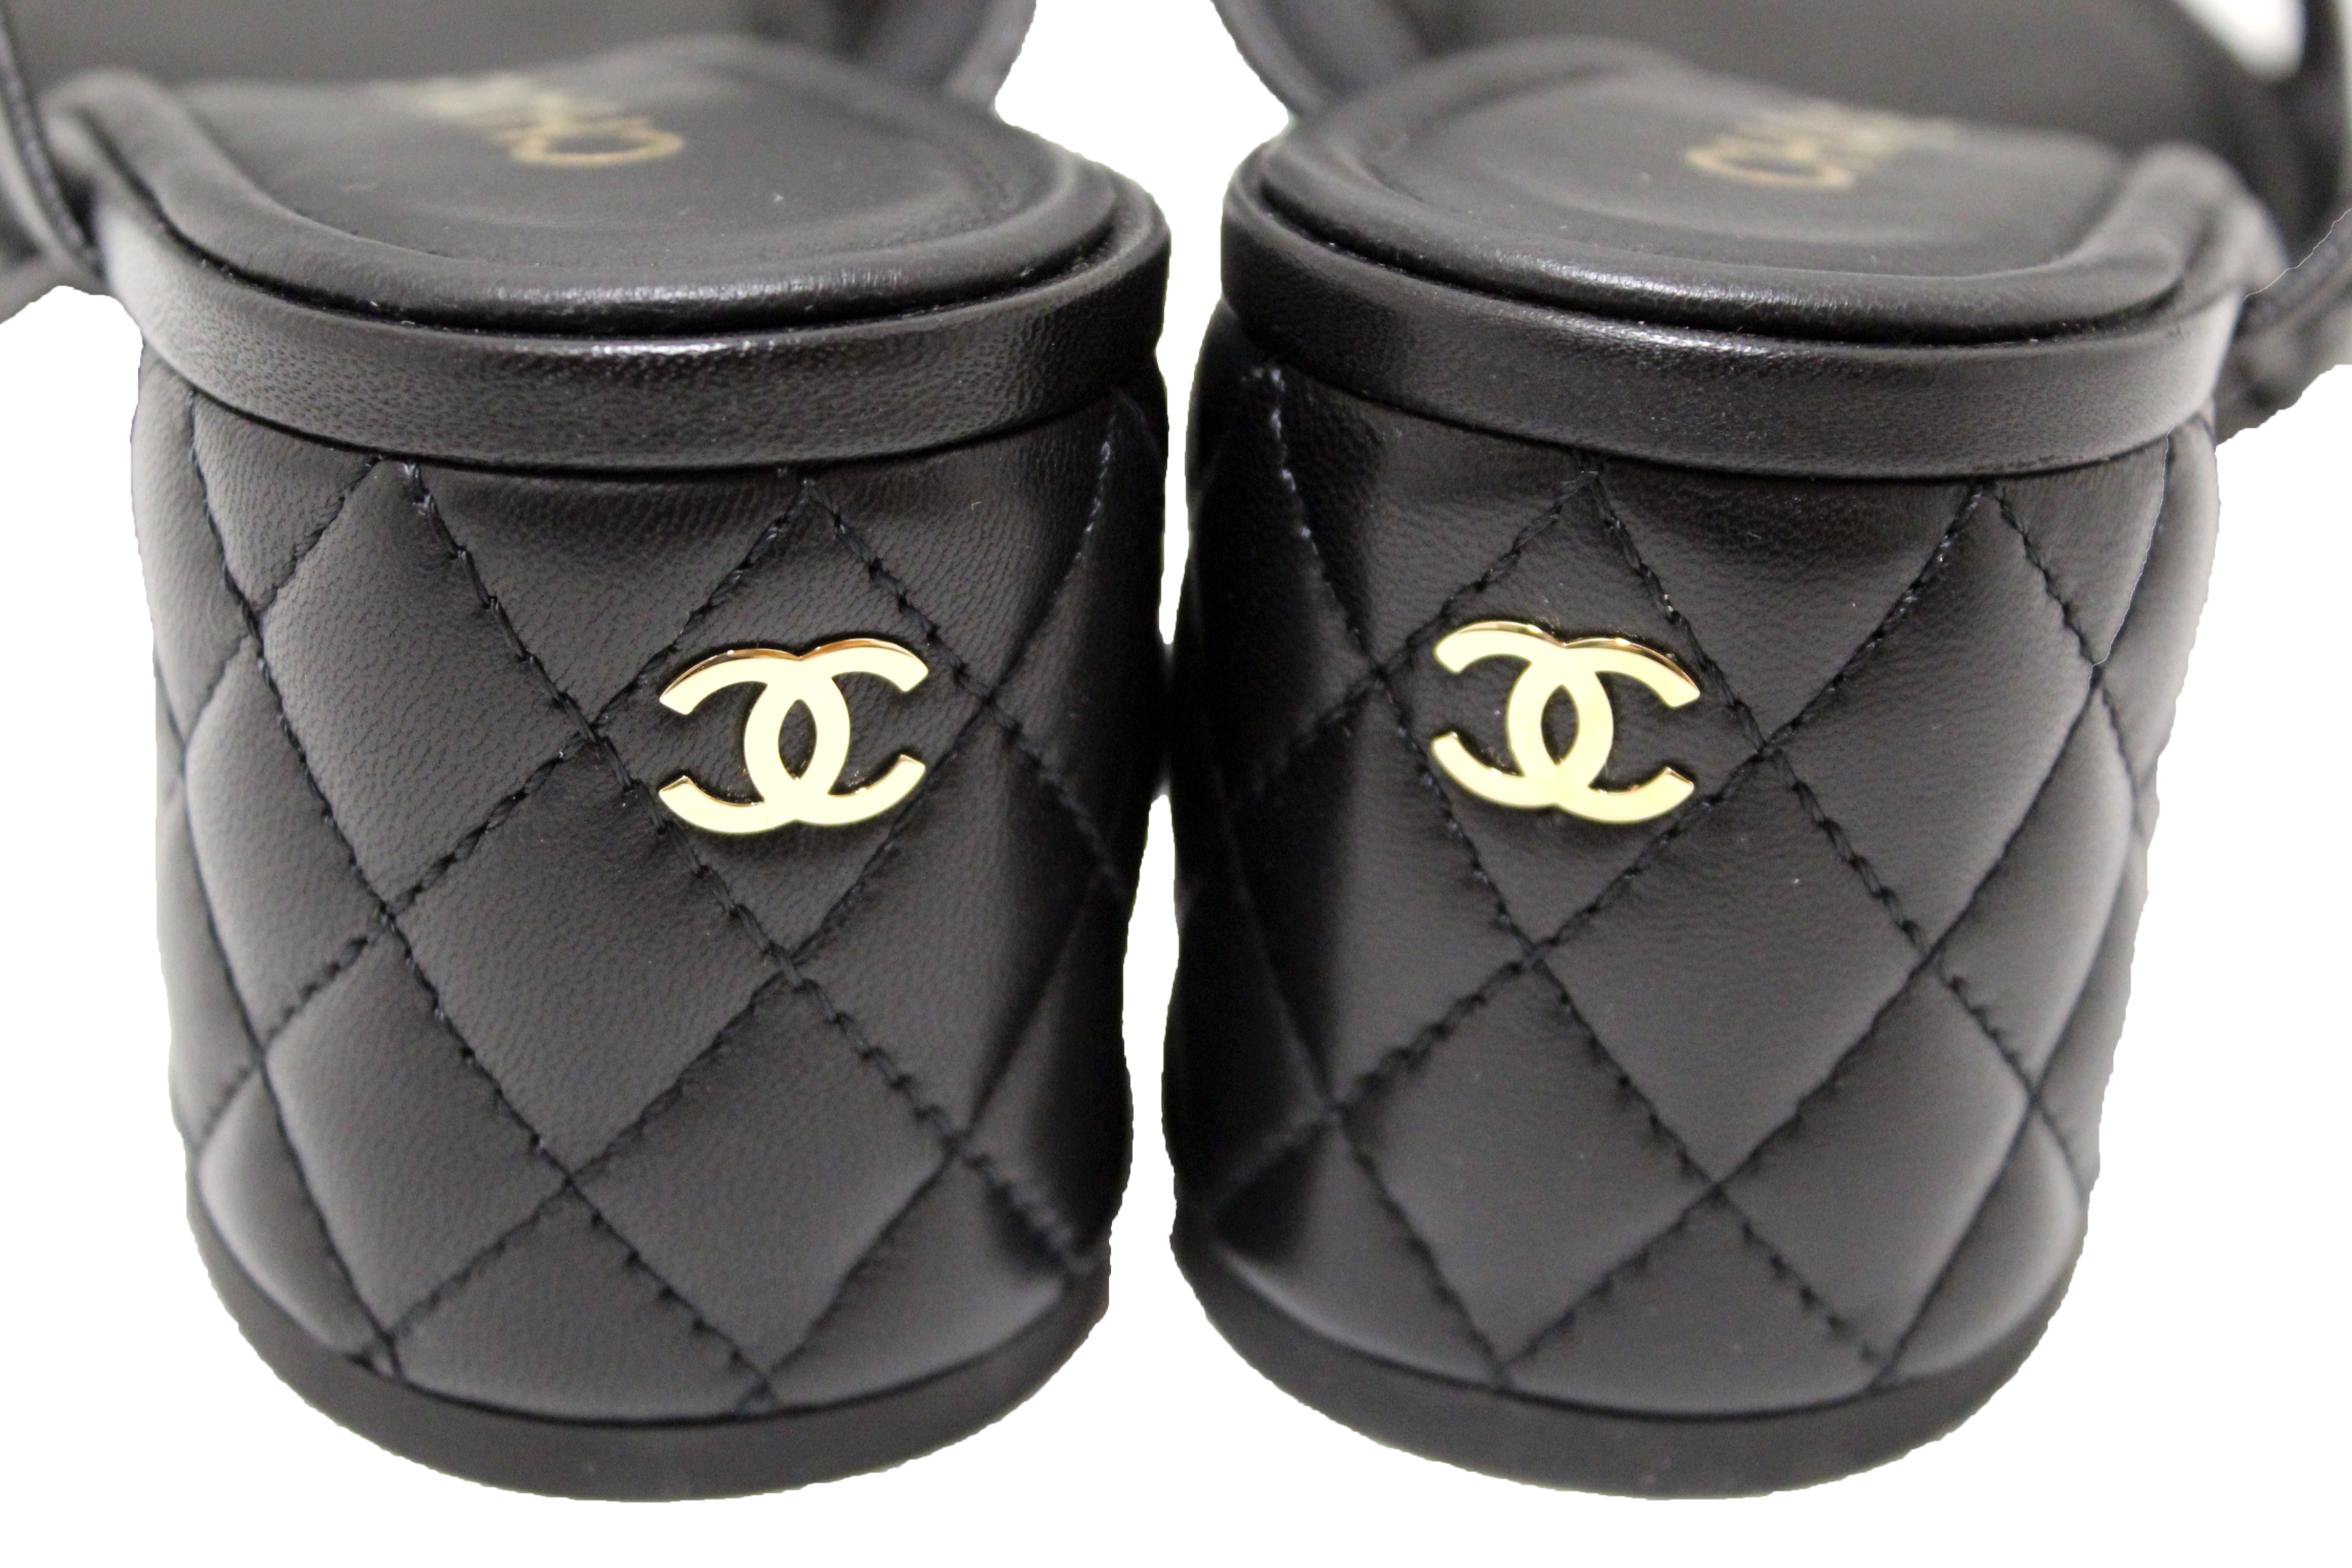 Authentic NEW Chanel Black Lambskin with Mesh Strappy Block-Heel Mules Size 40.5